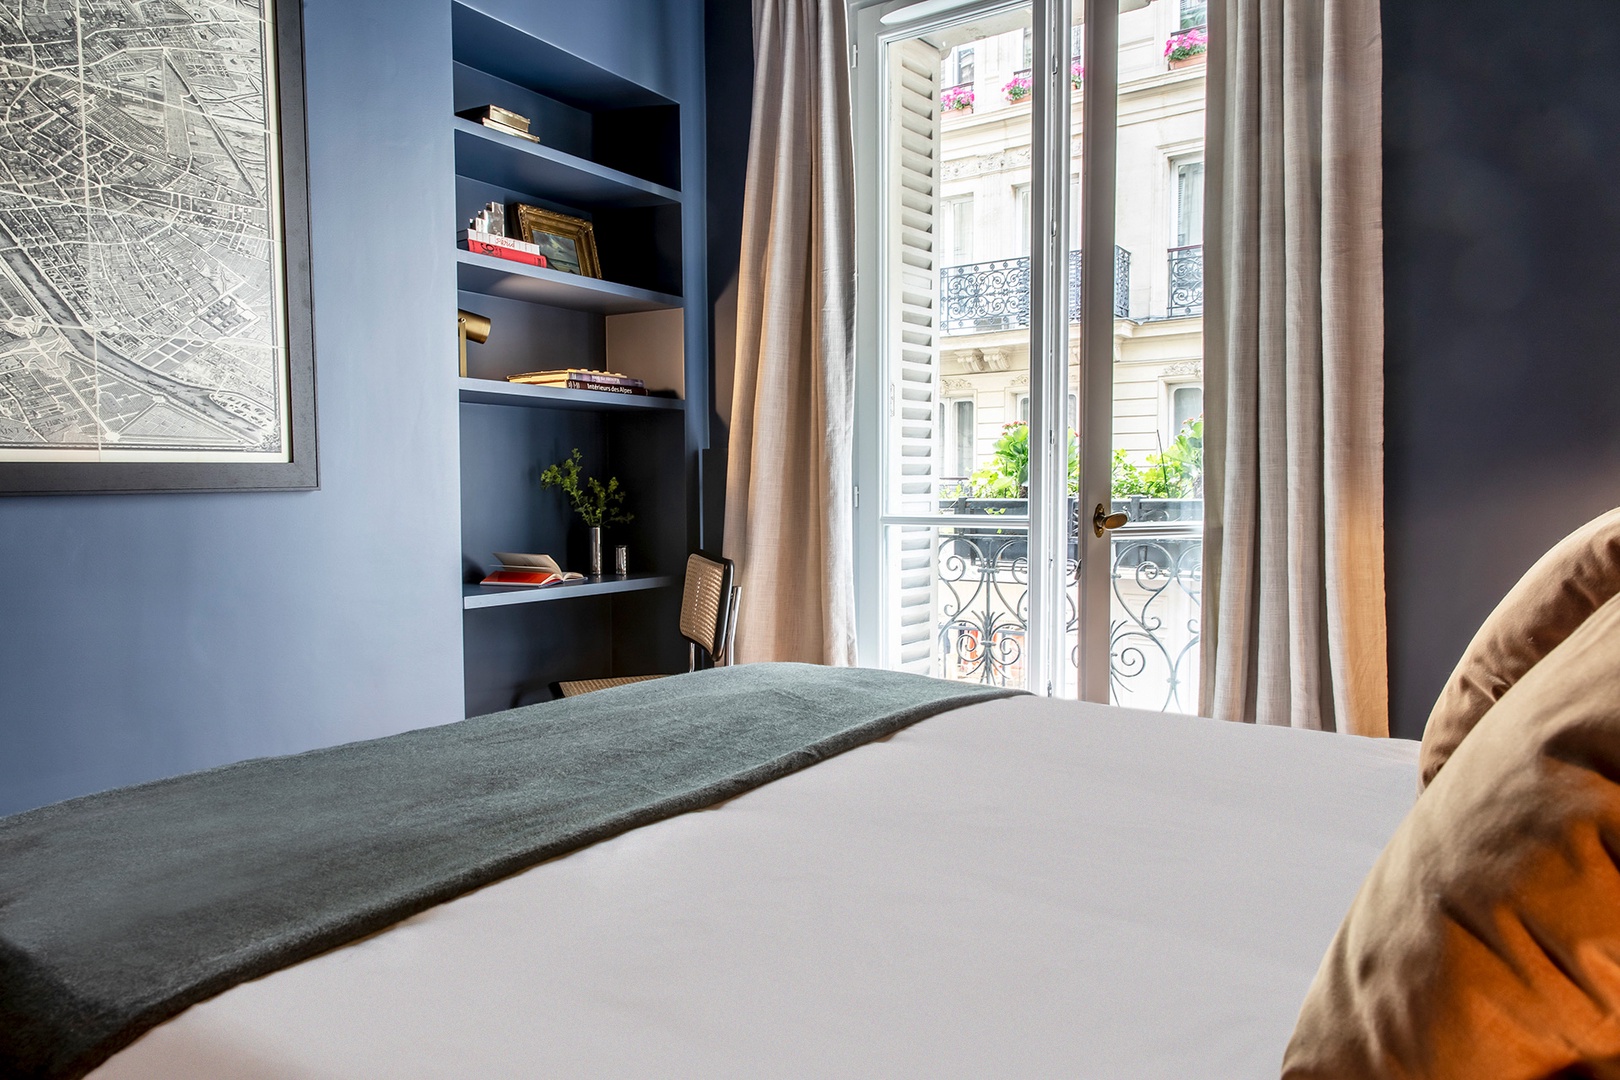 Enjoy views of classic Parisian architecture from bedroom 2.